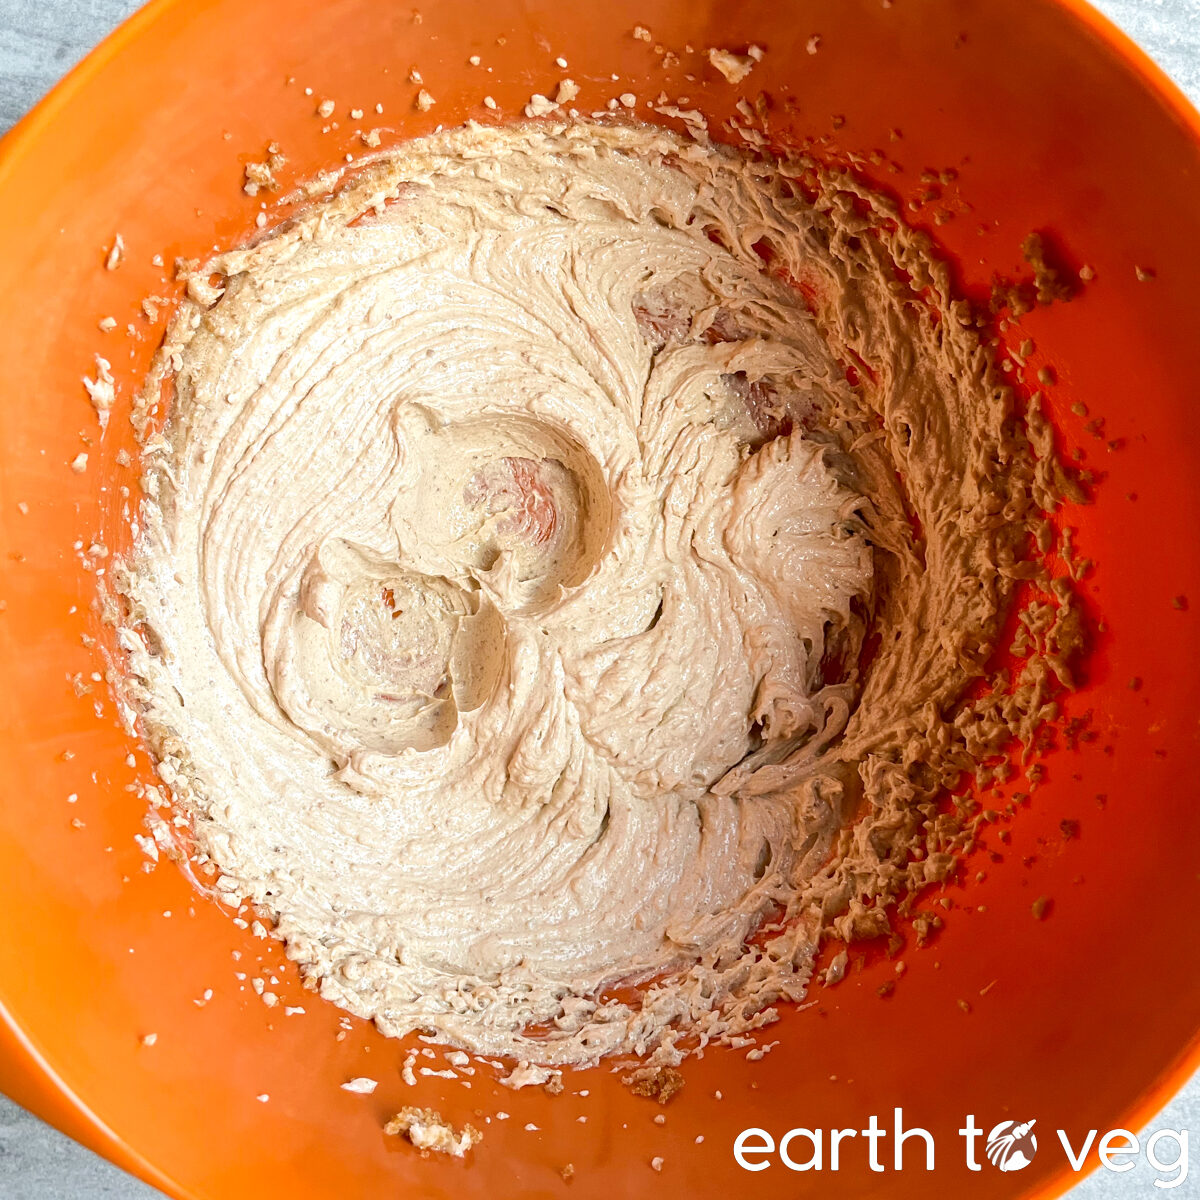 Brown sugar and vegan butter are creamed together in an orange melamine mixing bowl.